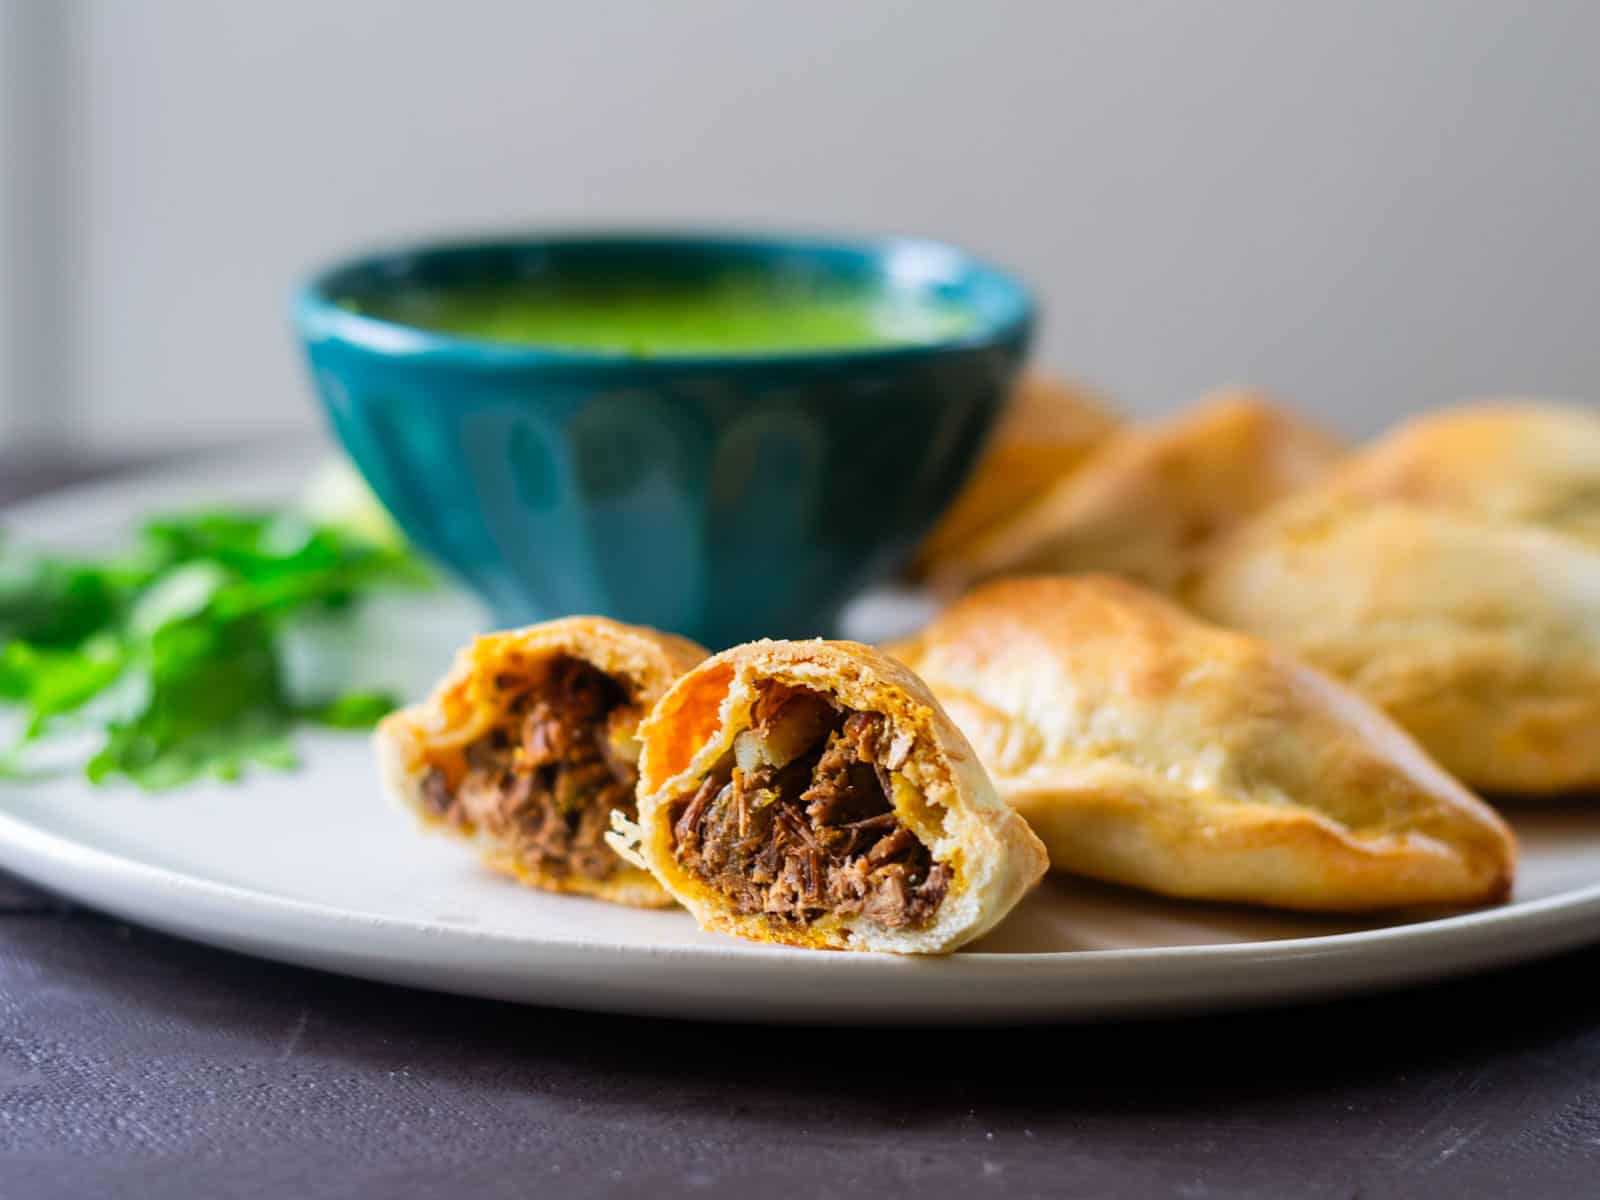 Baked empanadas filled with brisket and potatoes.